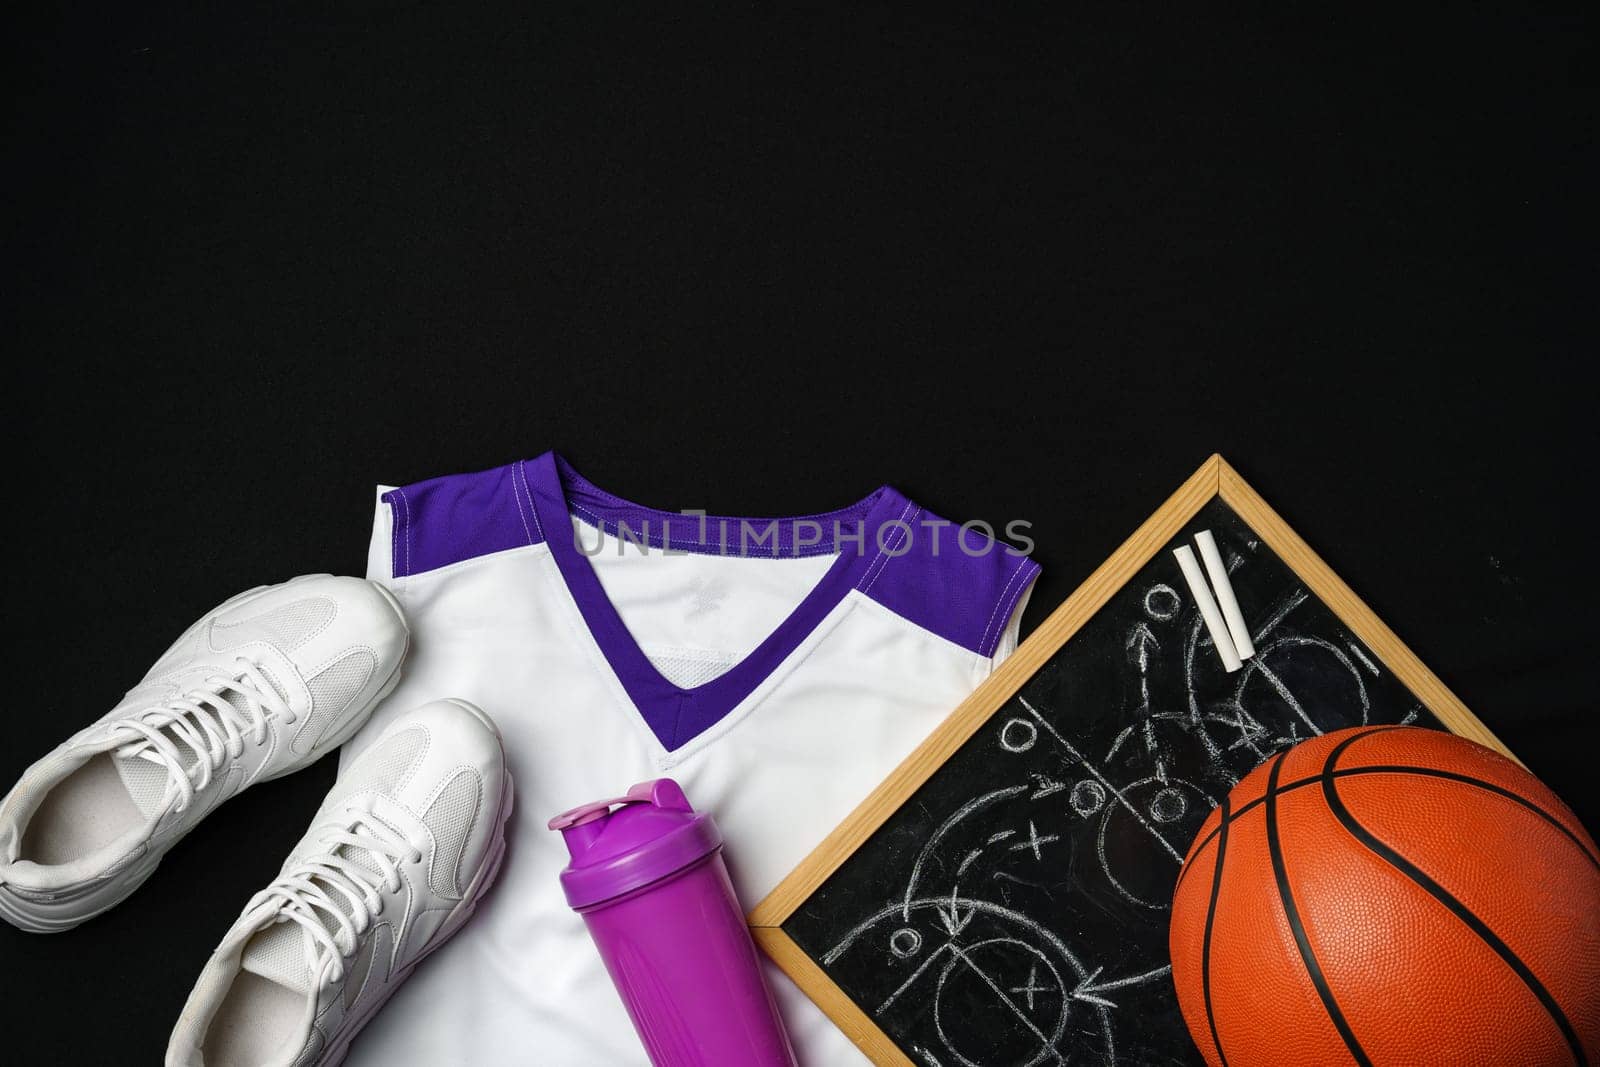 A collection of basketball essentials is neatly arranged against a stark black backdrop. A pair of white sneakers with purple accents lies next to a vibrant orange basketball. On the right, a clipboard with a basketball court diagram and a strategy sketched in white chalk can be seen, while a white and purple basketball jersey drapes gracefully at the edge. Completing the set, a purple sports water bottle caps off the ensemble, suggesting preparation for an upcoming game or practice session.